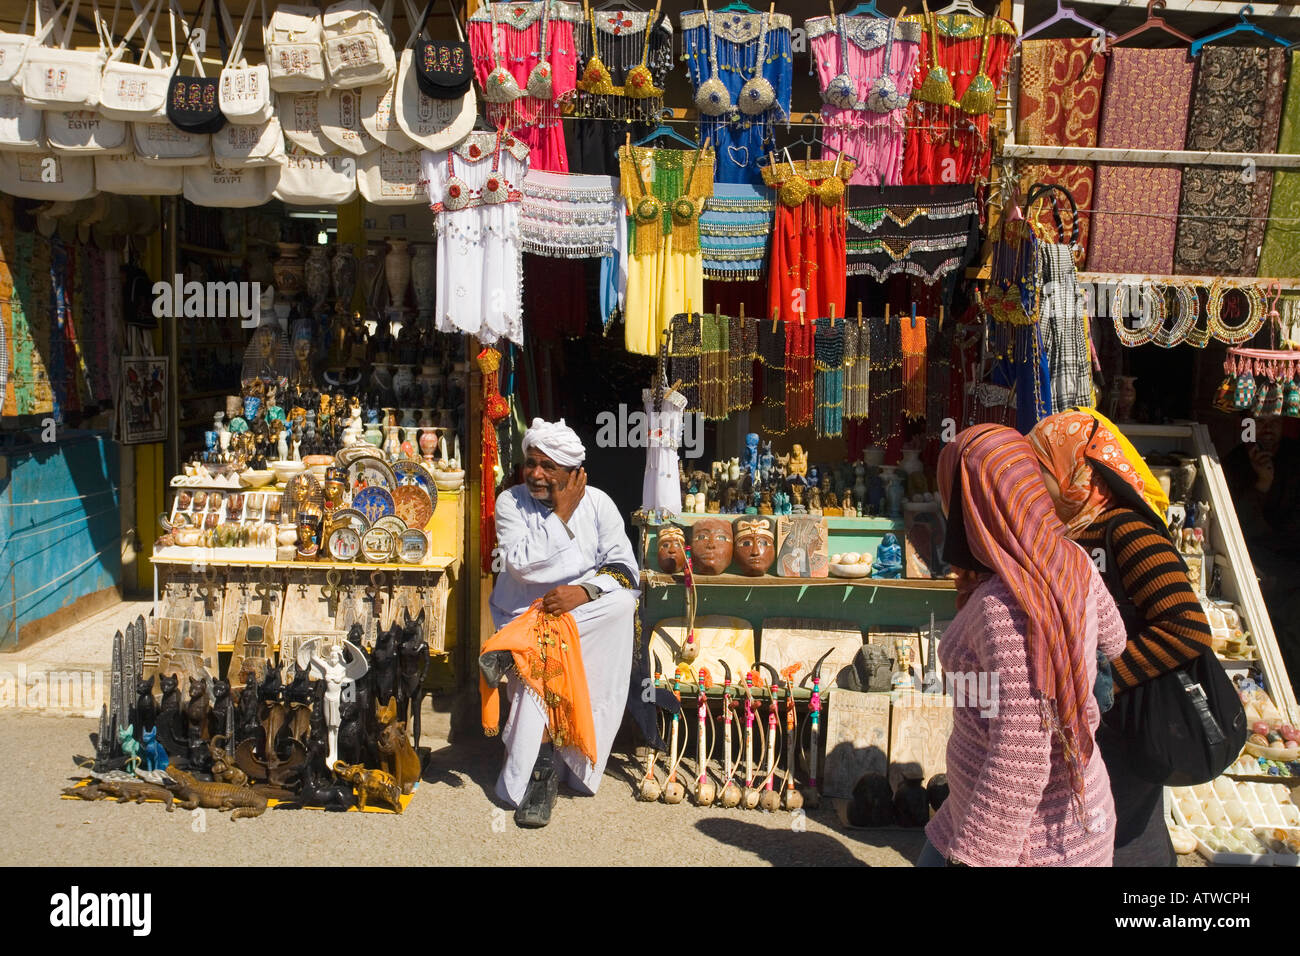 Egyptian market stall selling tourist souvenirs gifts Luxor Egypt North Africa Stock Photo